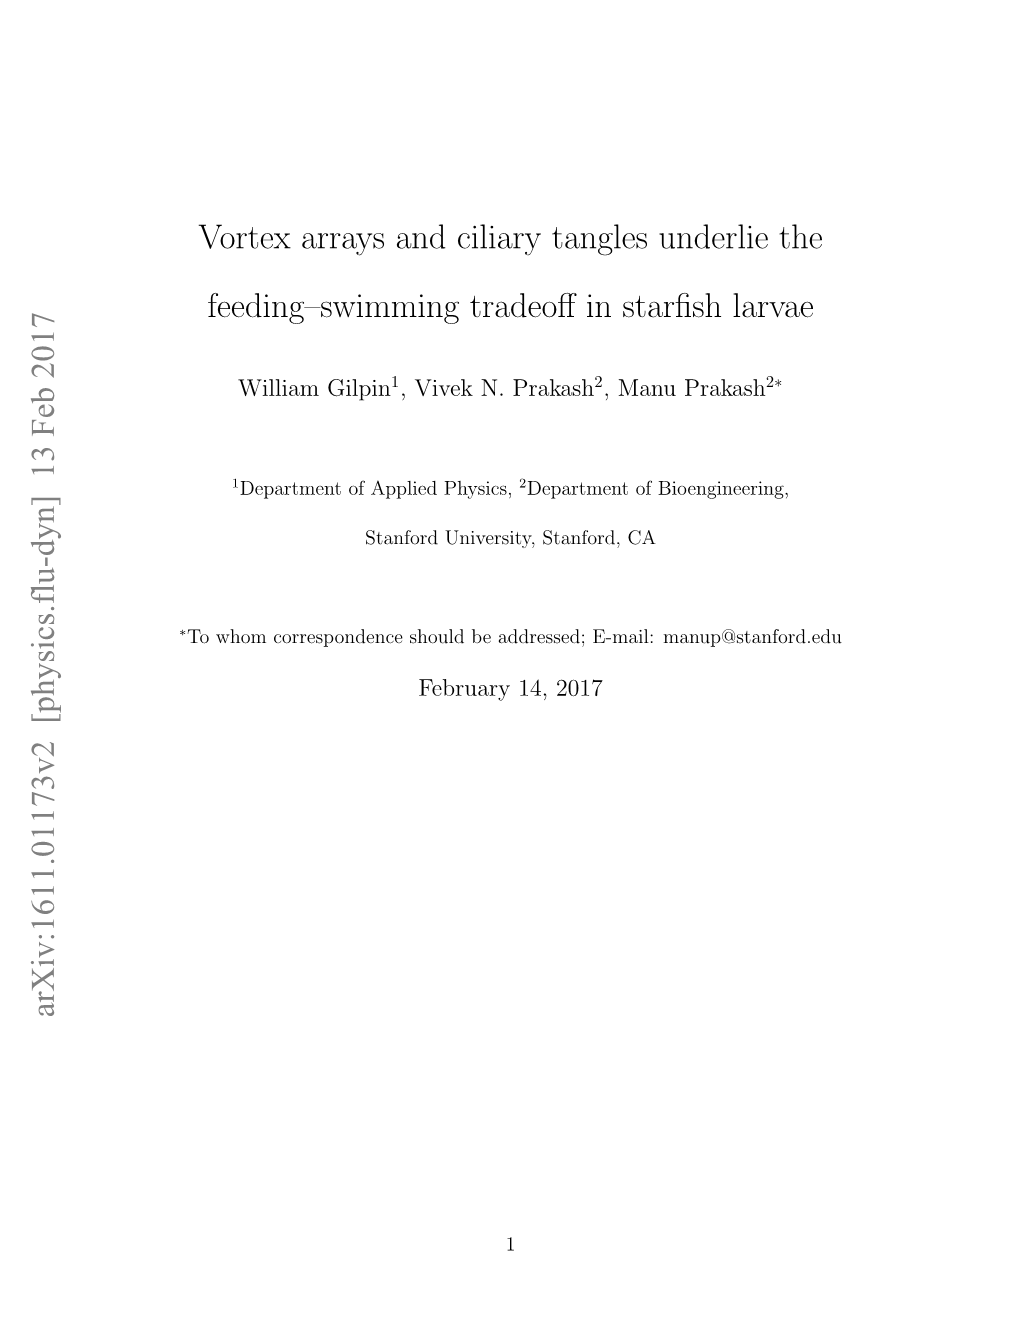 Vortex Arrays and Ciliary Tangles Underlie the Feeding–Swimming Tradeoﬀ in Starﬁsh Larvae